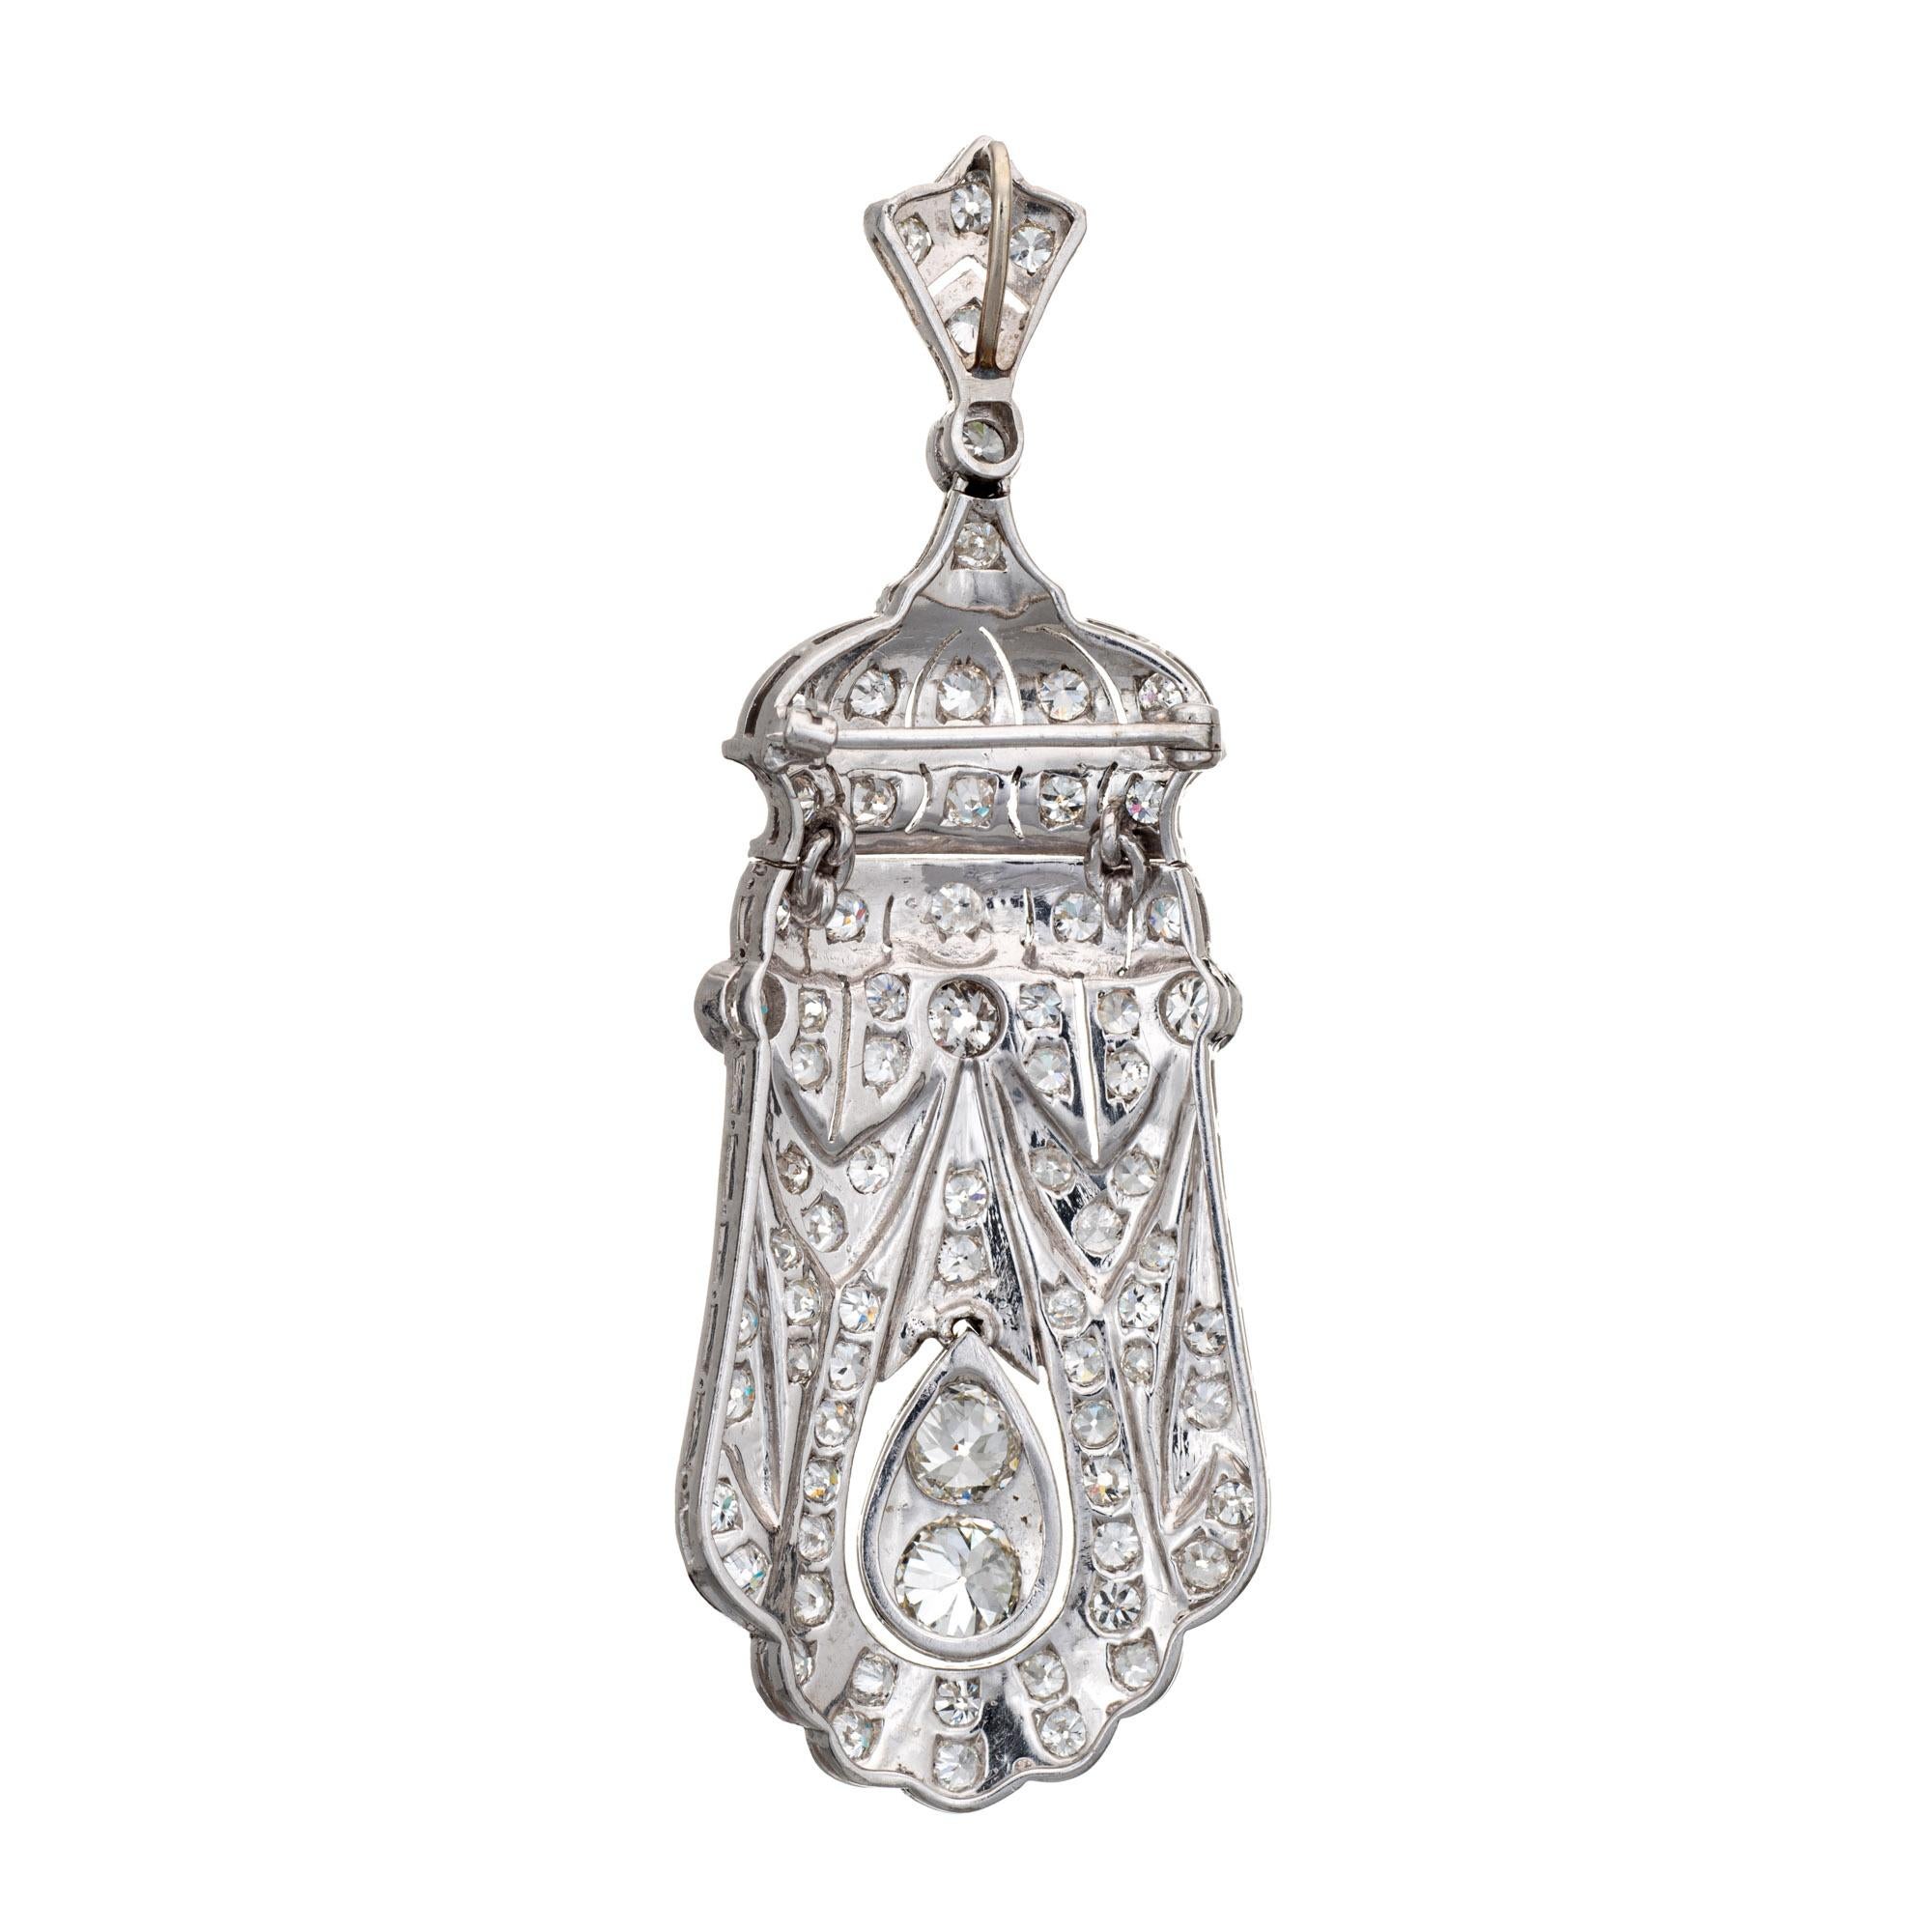 Finely detailed antique Edwardian diamond pendant crafted in platinum (circa 1910s to 1920s).  

Old European cut diamonds range in size from 0.05 to 0.75 carats and total an estimated 5.50 carats (estimated at I-J color and VS2-SI1 clarity). 

The